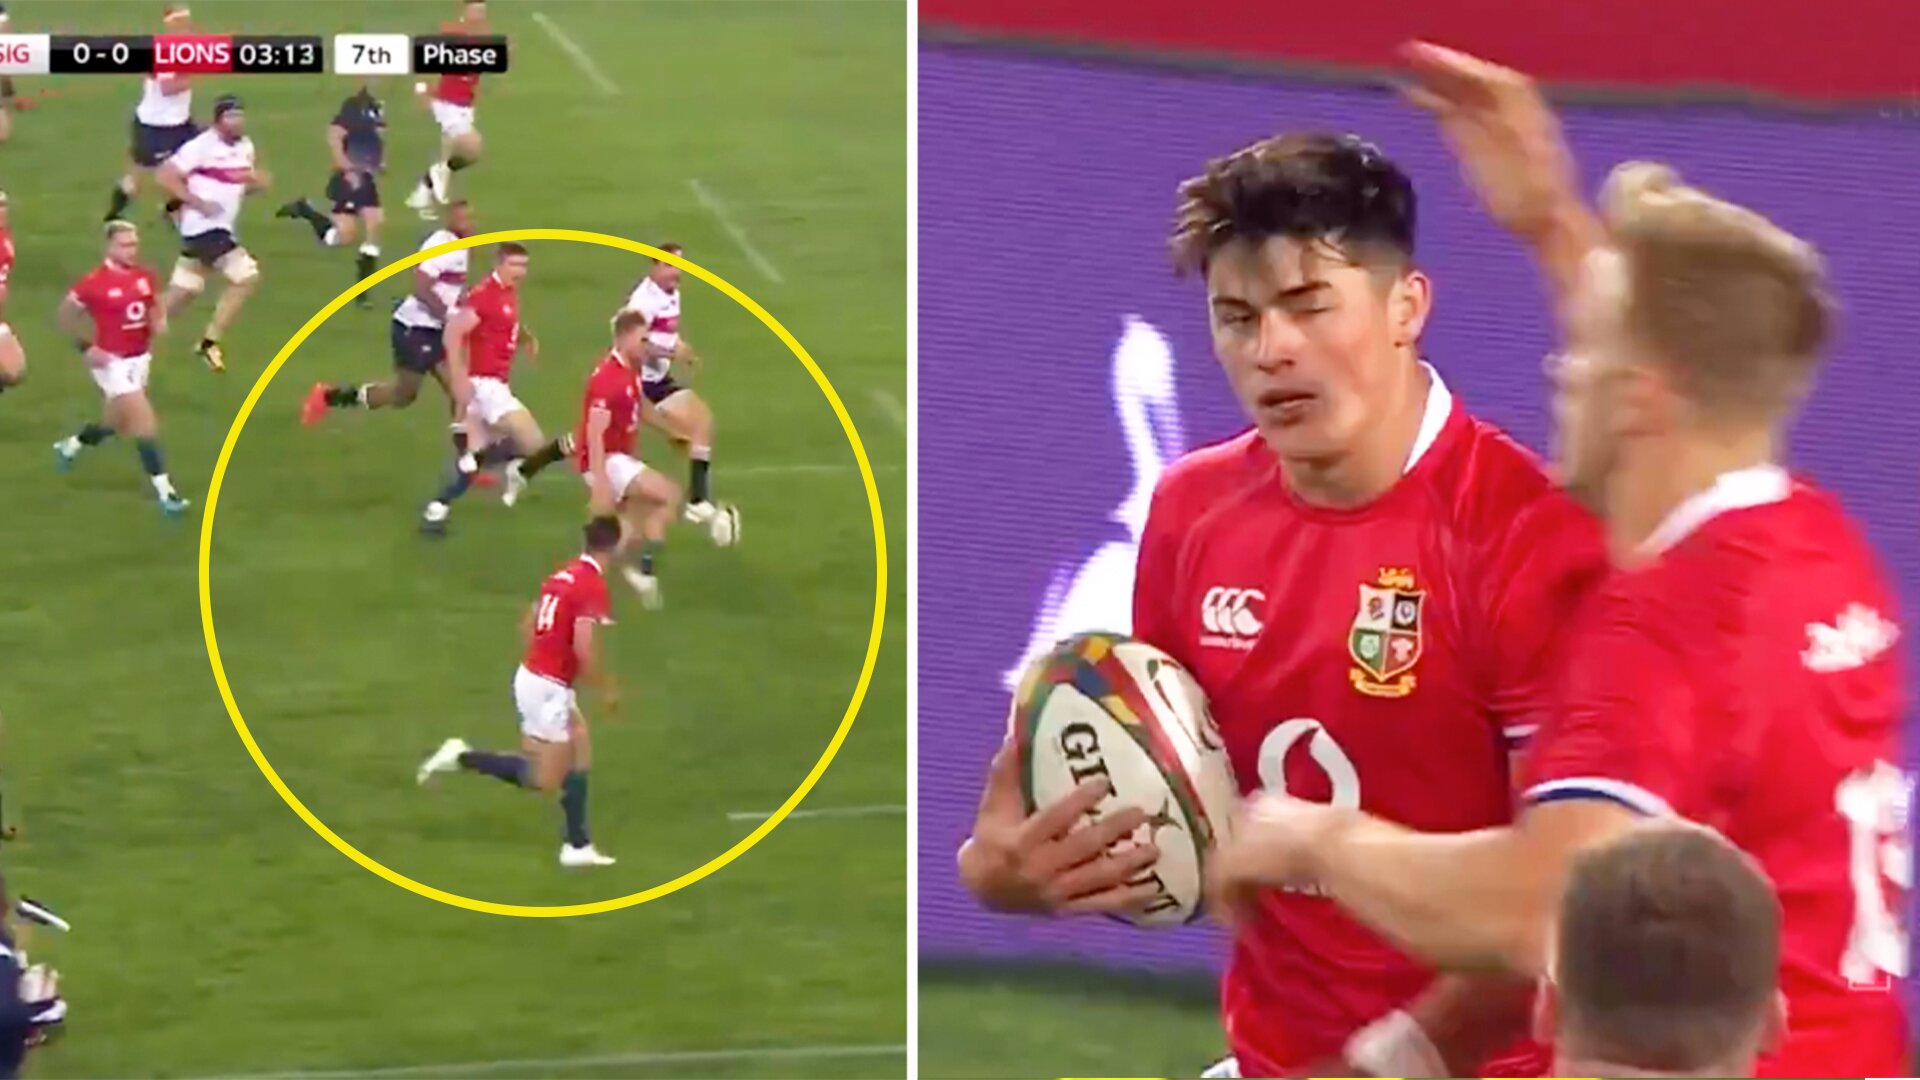 World's best winger Louis Rees-Zammit takes three minutes to score in Lions tour opener